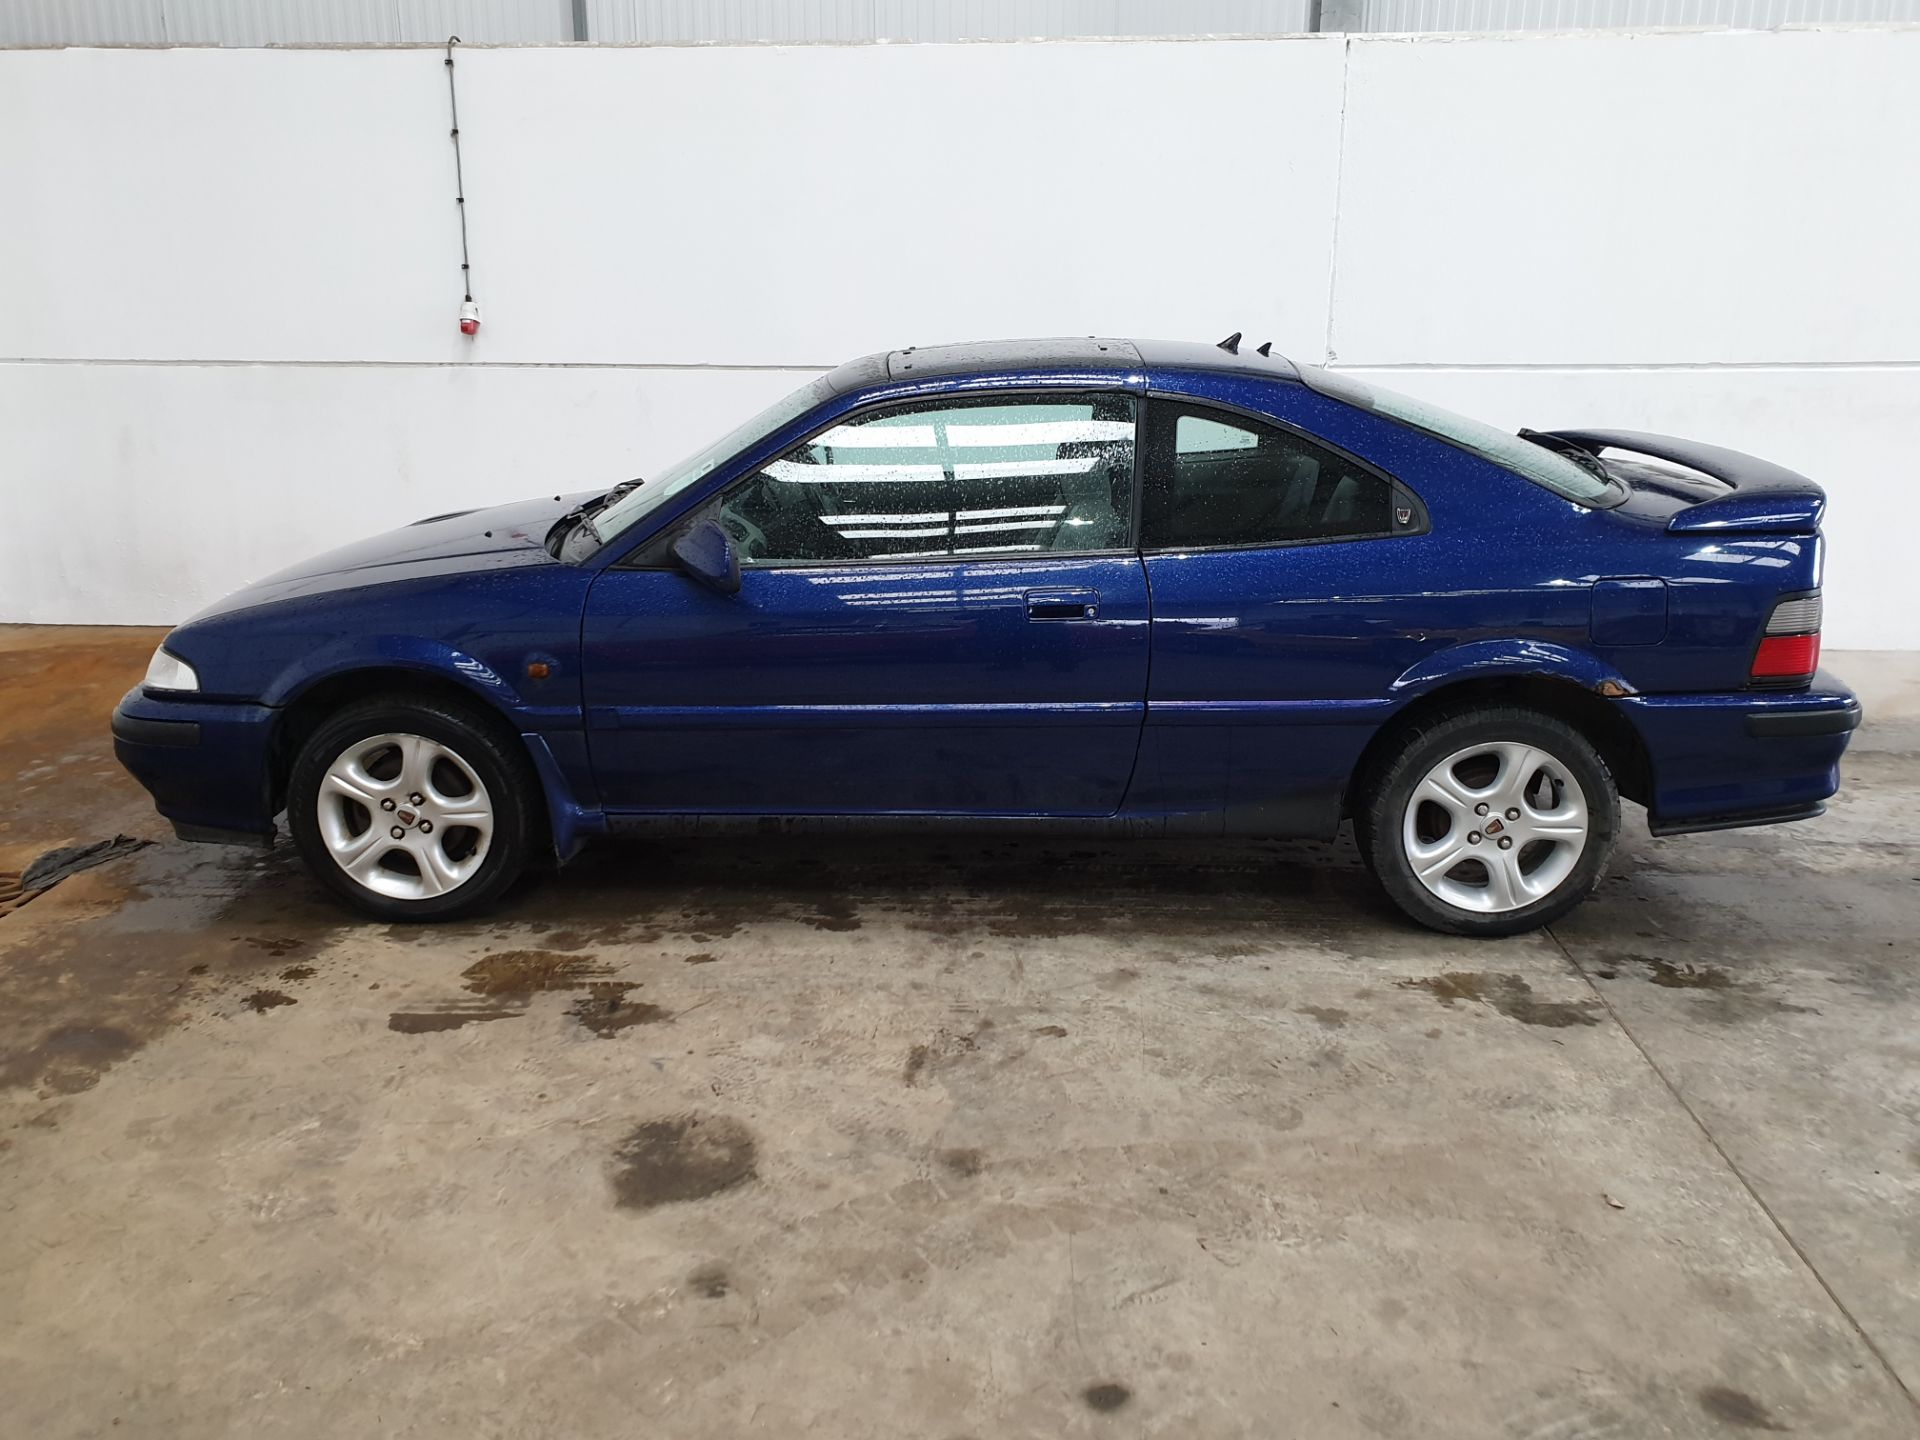 1998 Rover 216 Coupe SE - Image 6 of 11